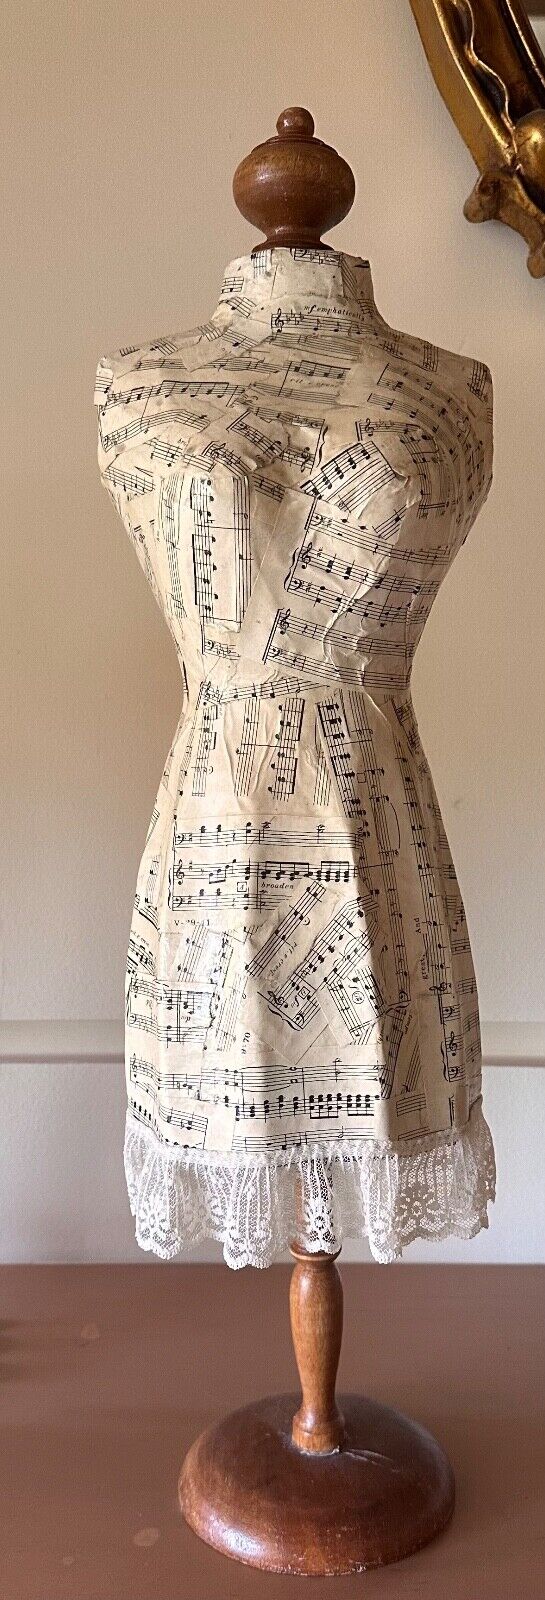    Jewelry display Vintage musical notes  Decoupage paper mache one of a kind 